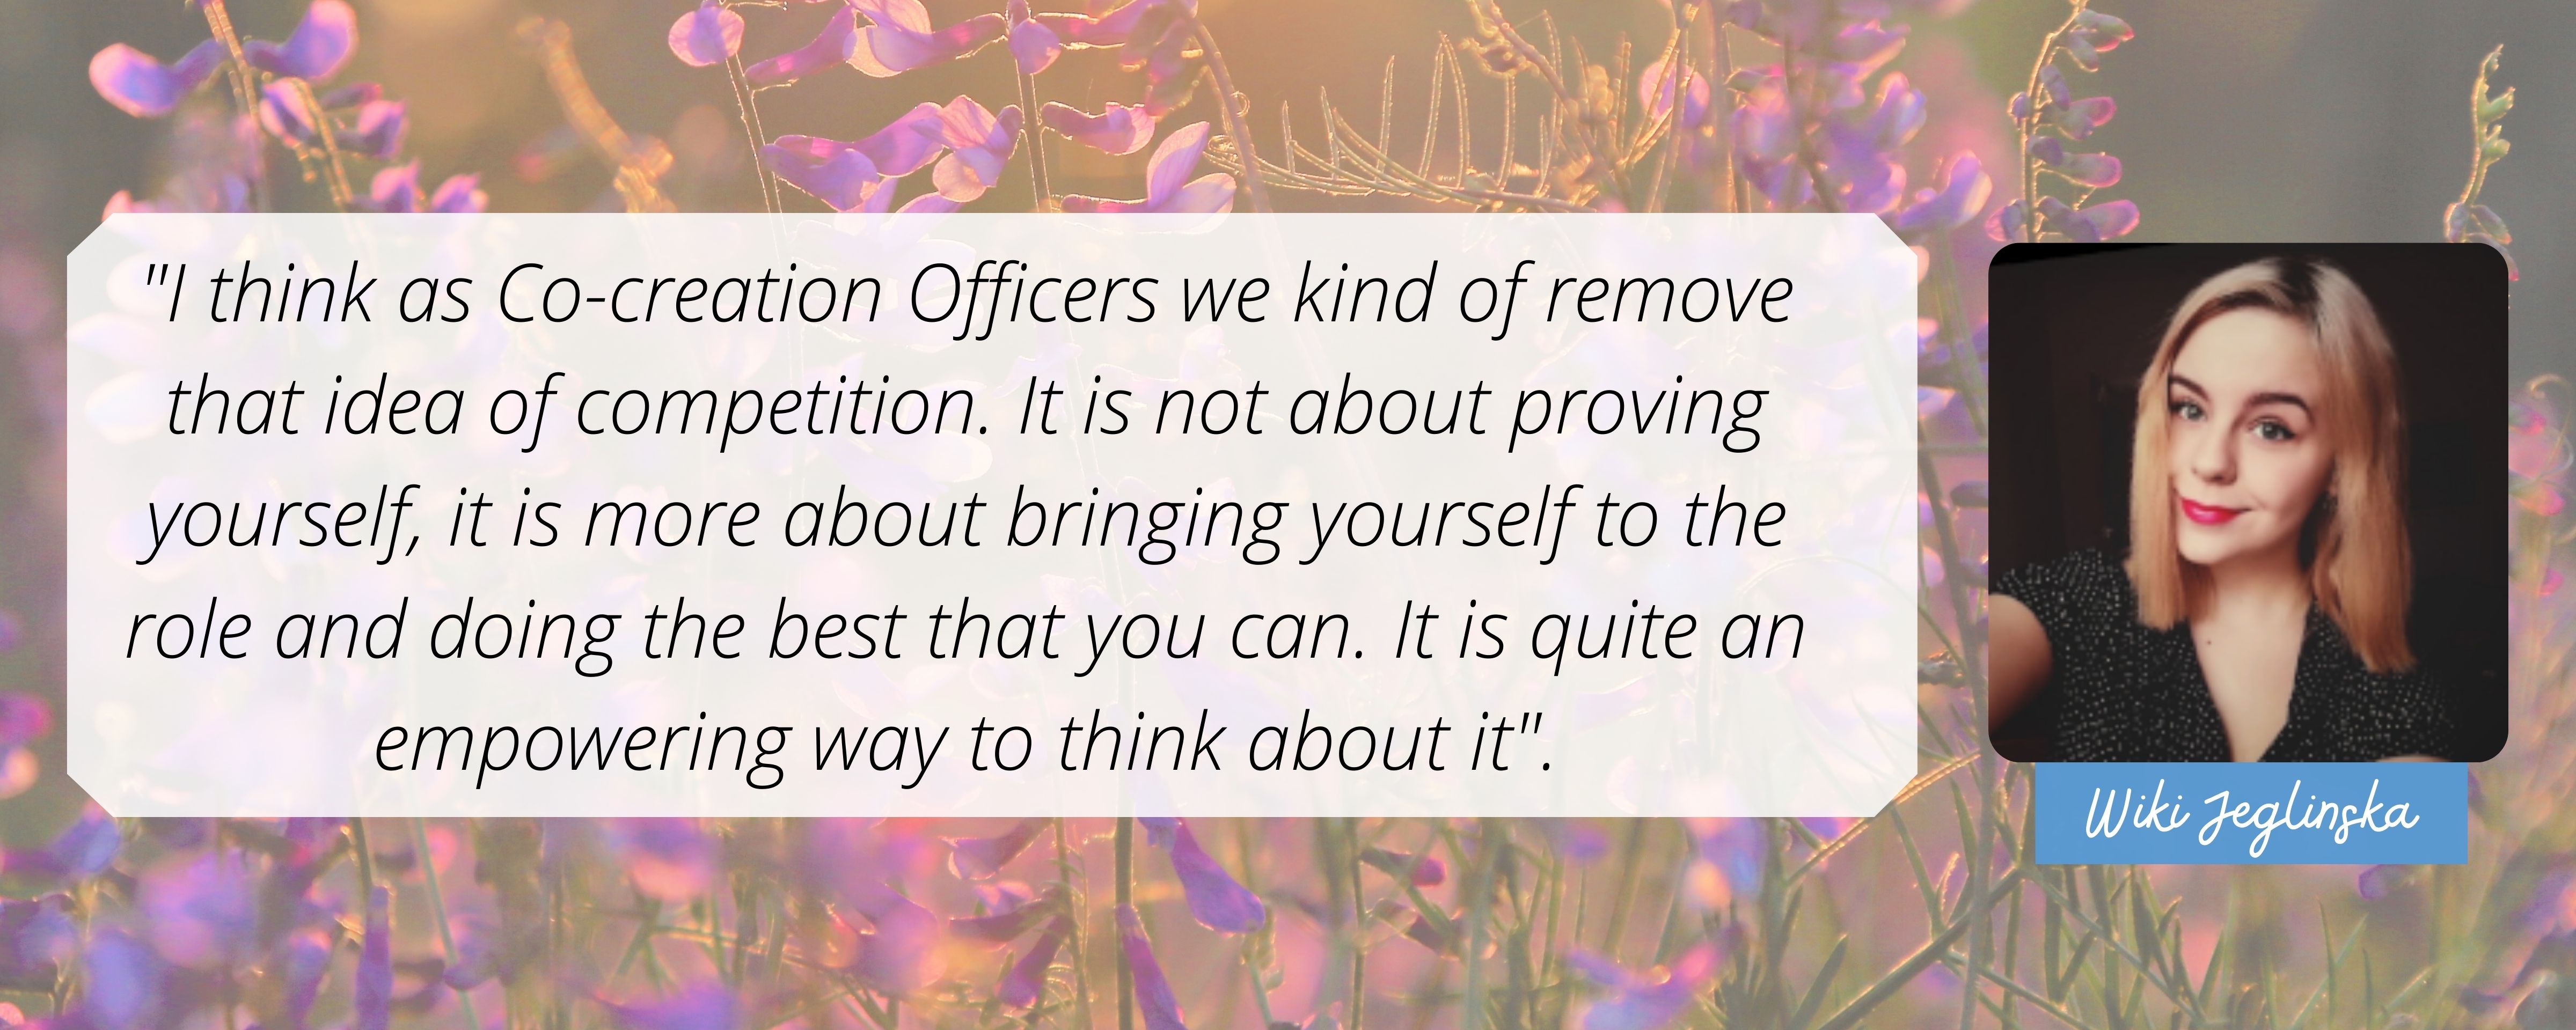 I think as Co-creation Officers we kind of remove that idea of competition. It is not about proving yourself, it is more about bringing yourself to the role and doing the best that you can. It is quite an empowering way to think about it.